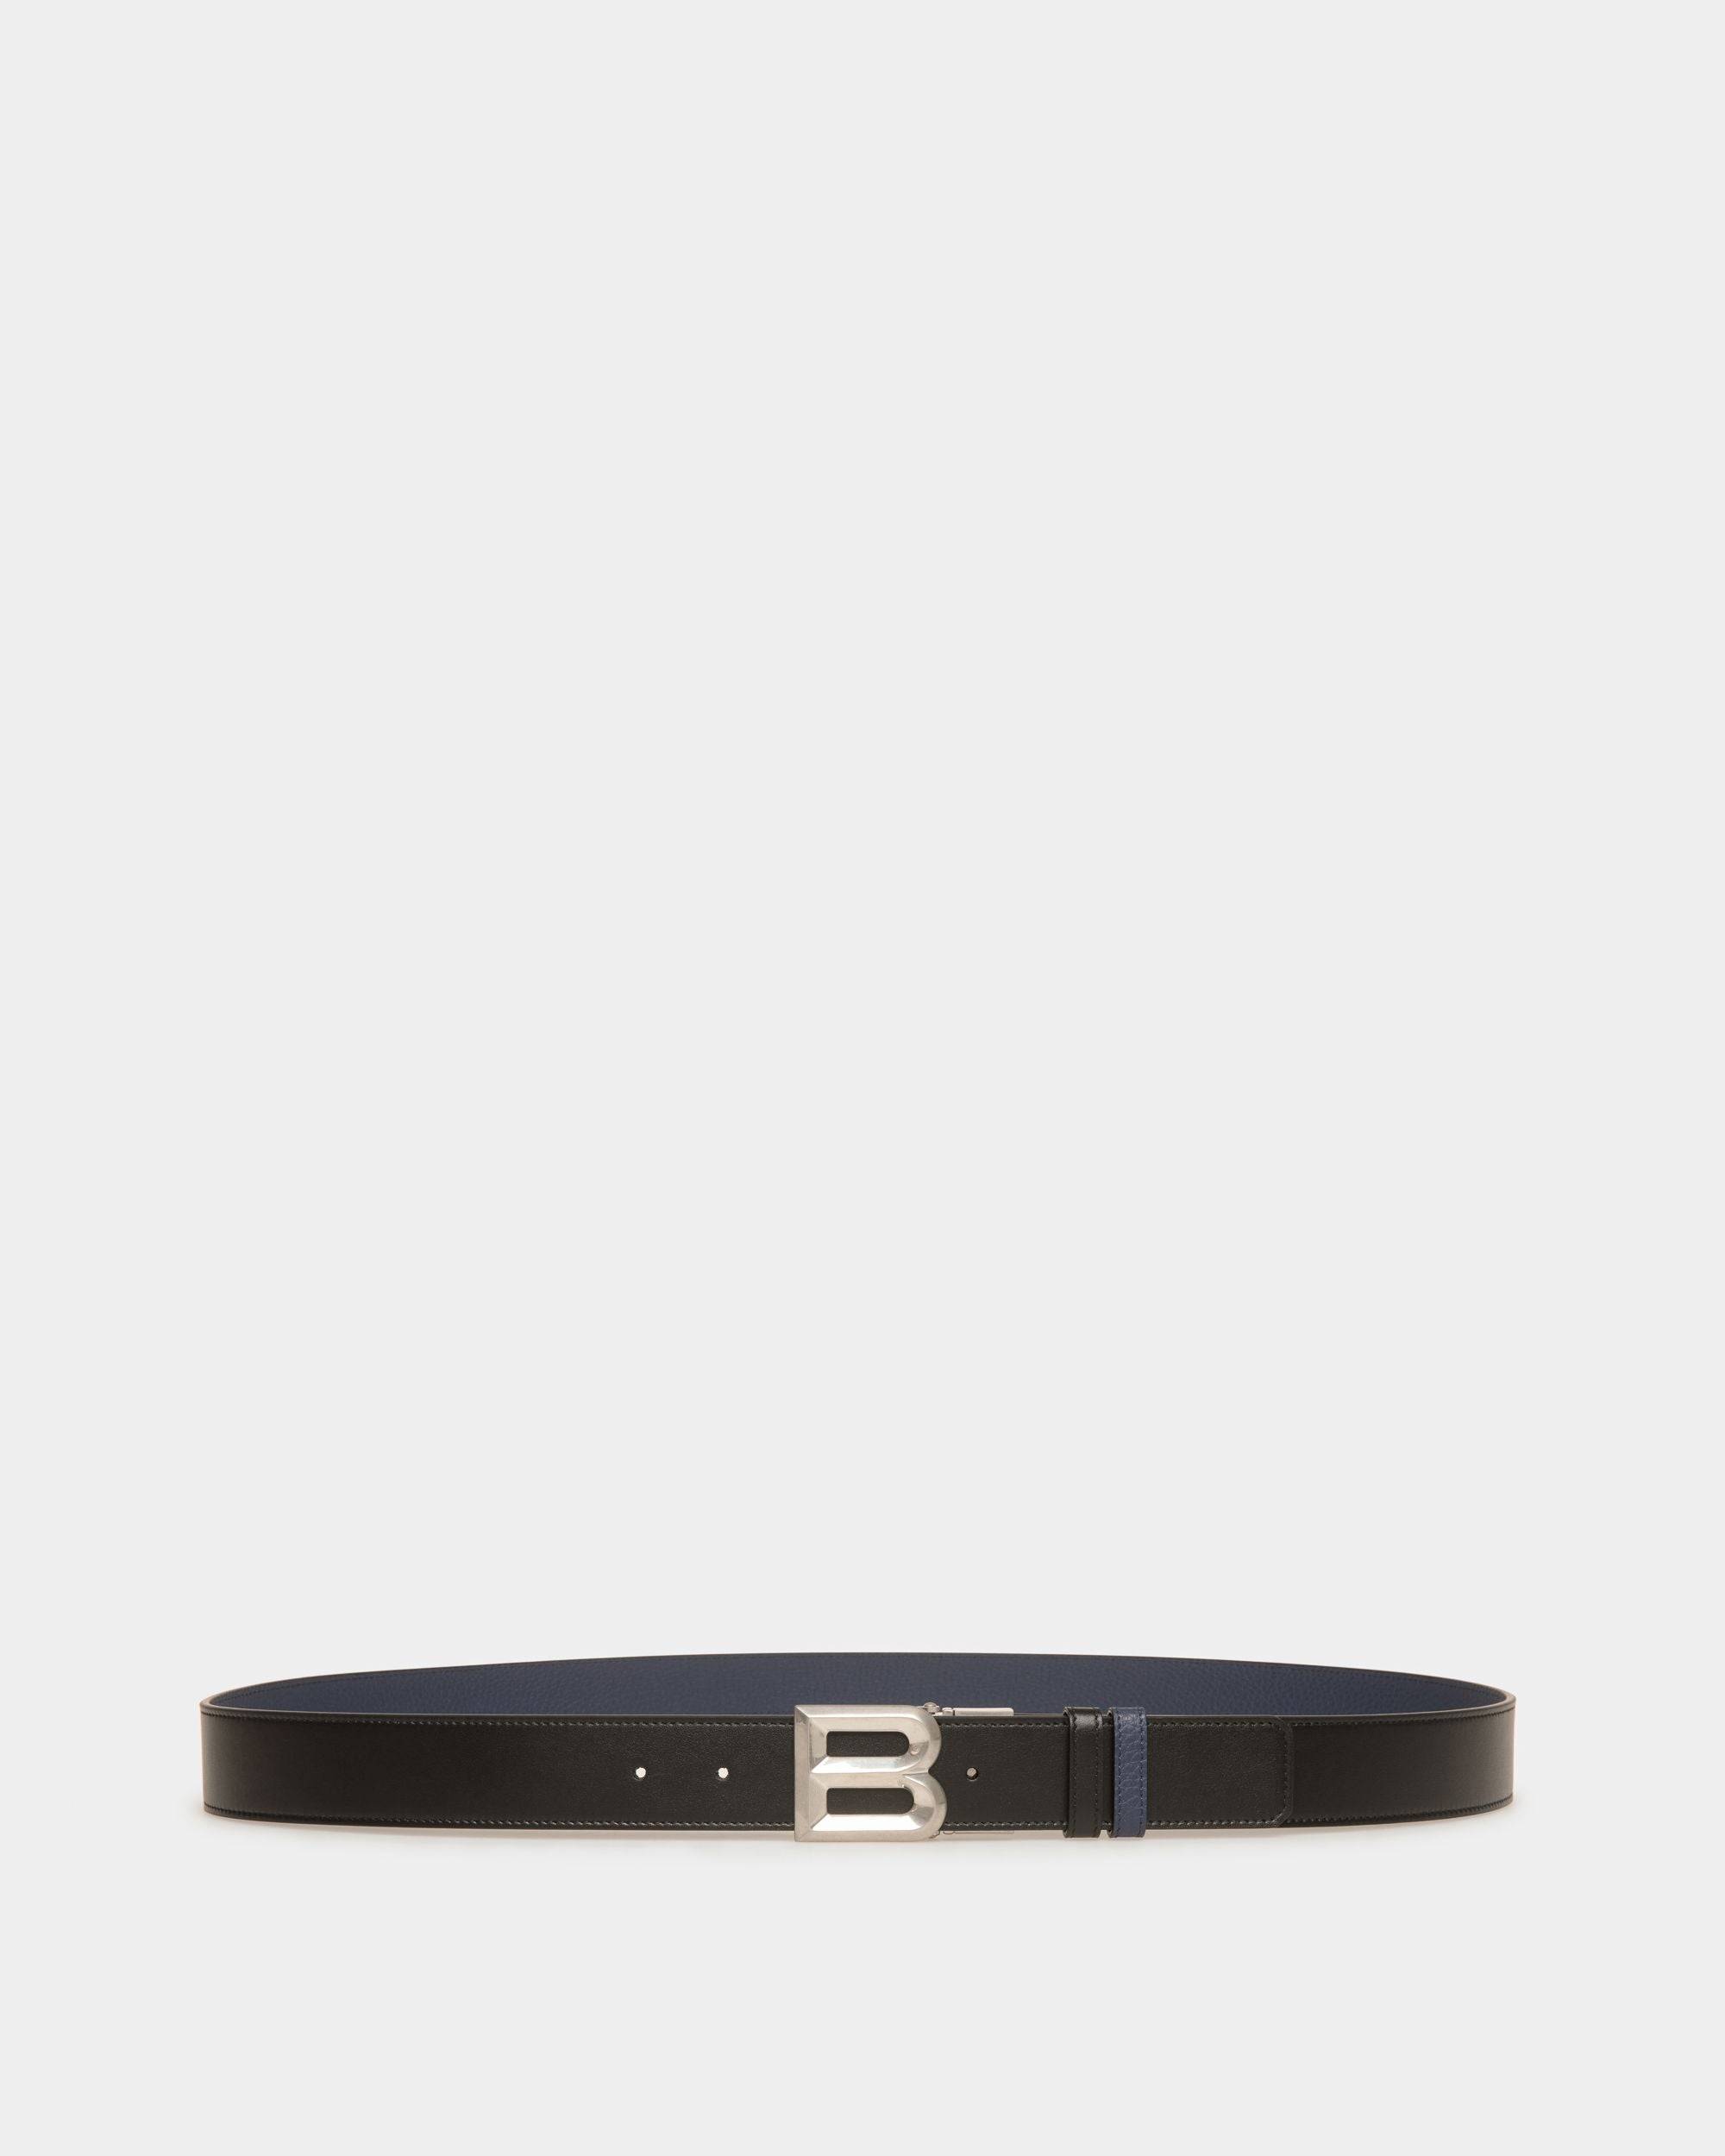 B Bold 35mm | Men's Reversible And Adjustable Belt in Black And Marine Leather | Bally | Still Life Front